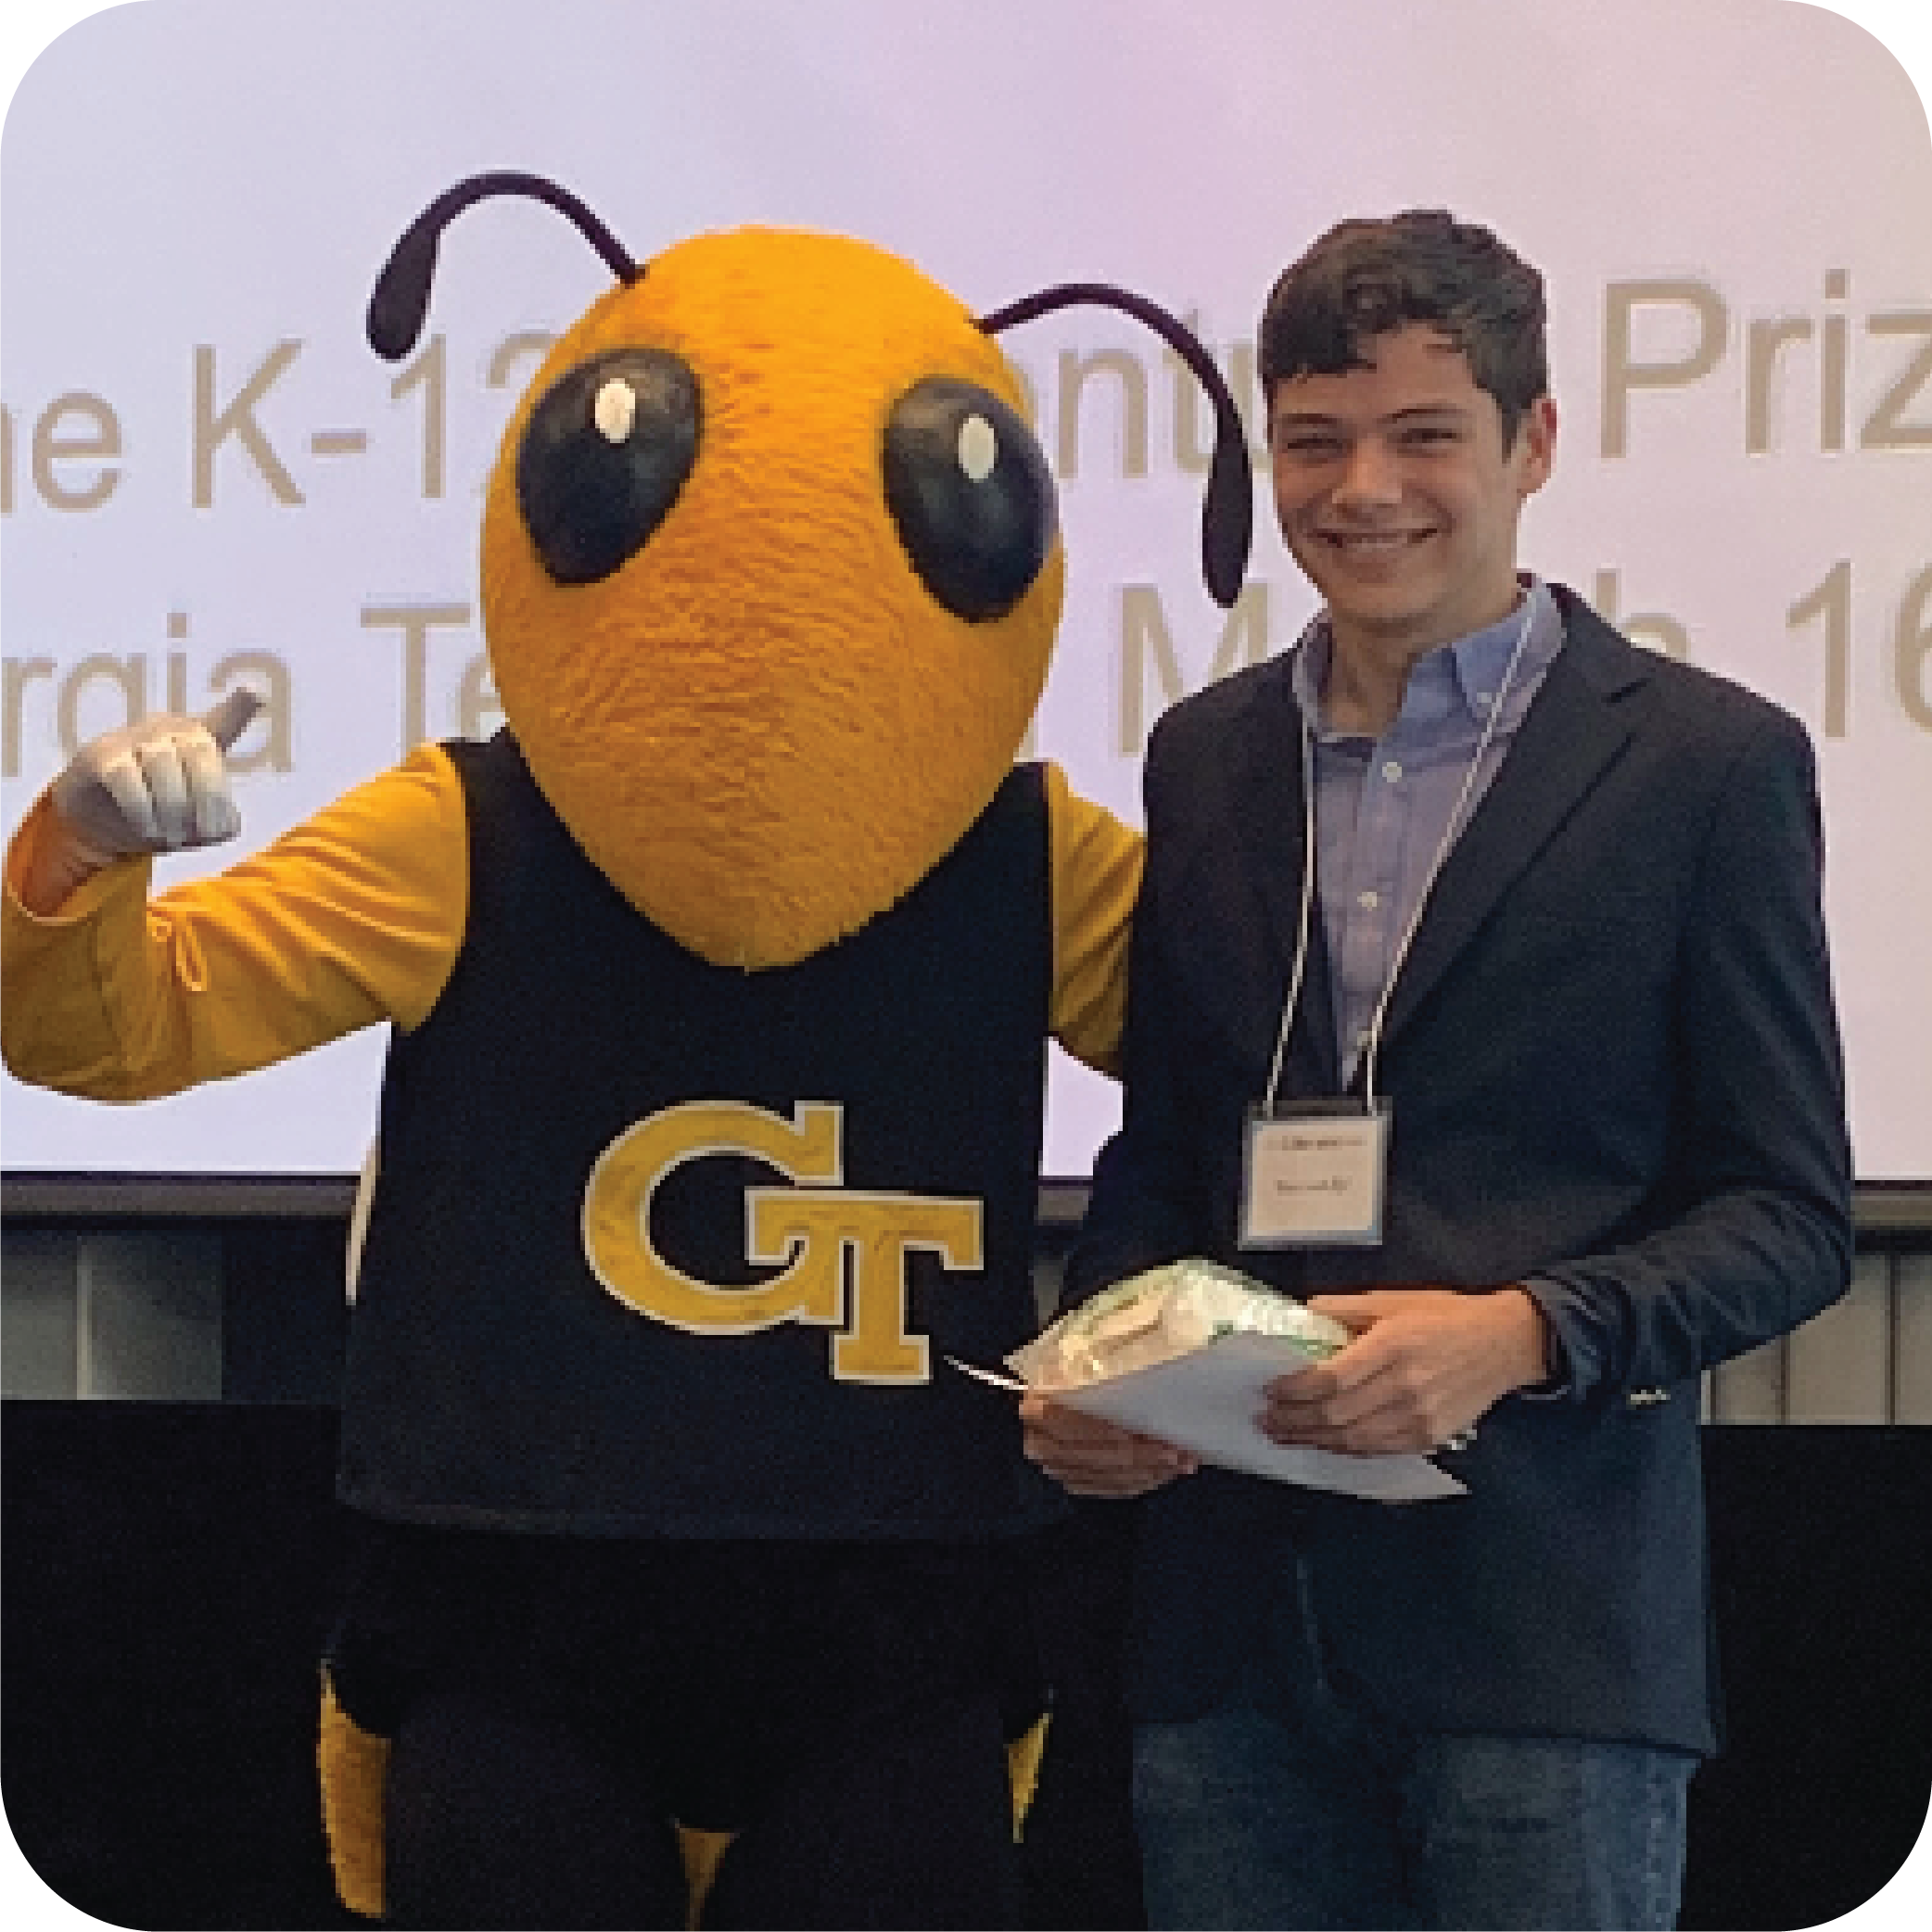 A smiling student holding prizes and standing next to Buzz (Georgia Tech's yellowjacket mascot).